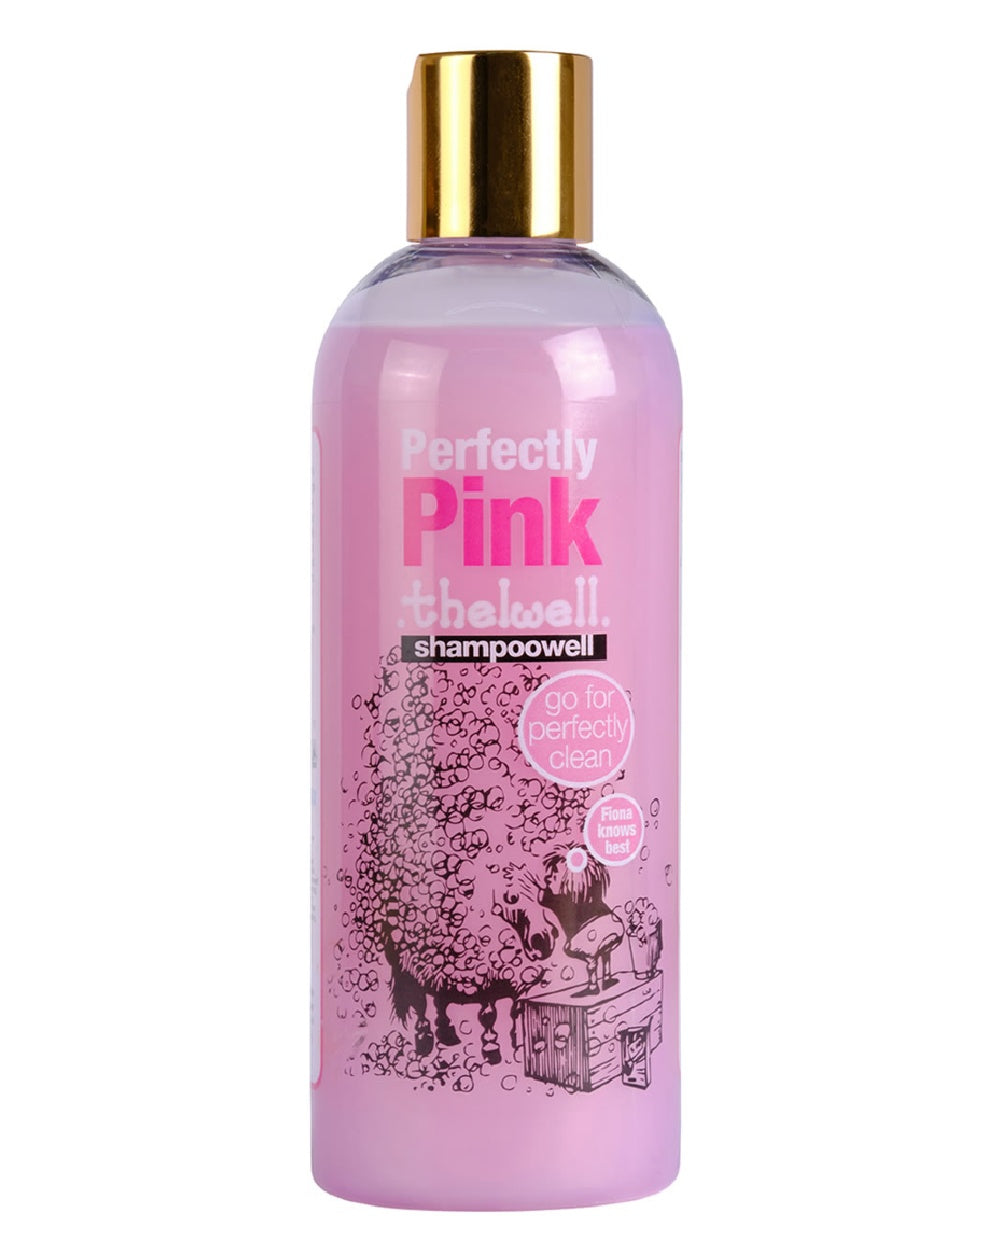 NAF Thelwell Perfectly Pink Shampoo 300ml on white background